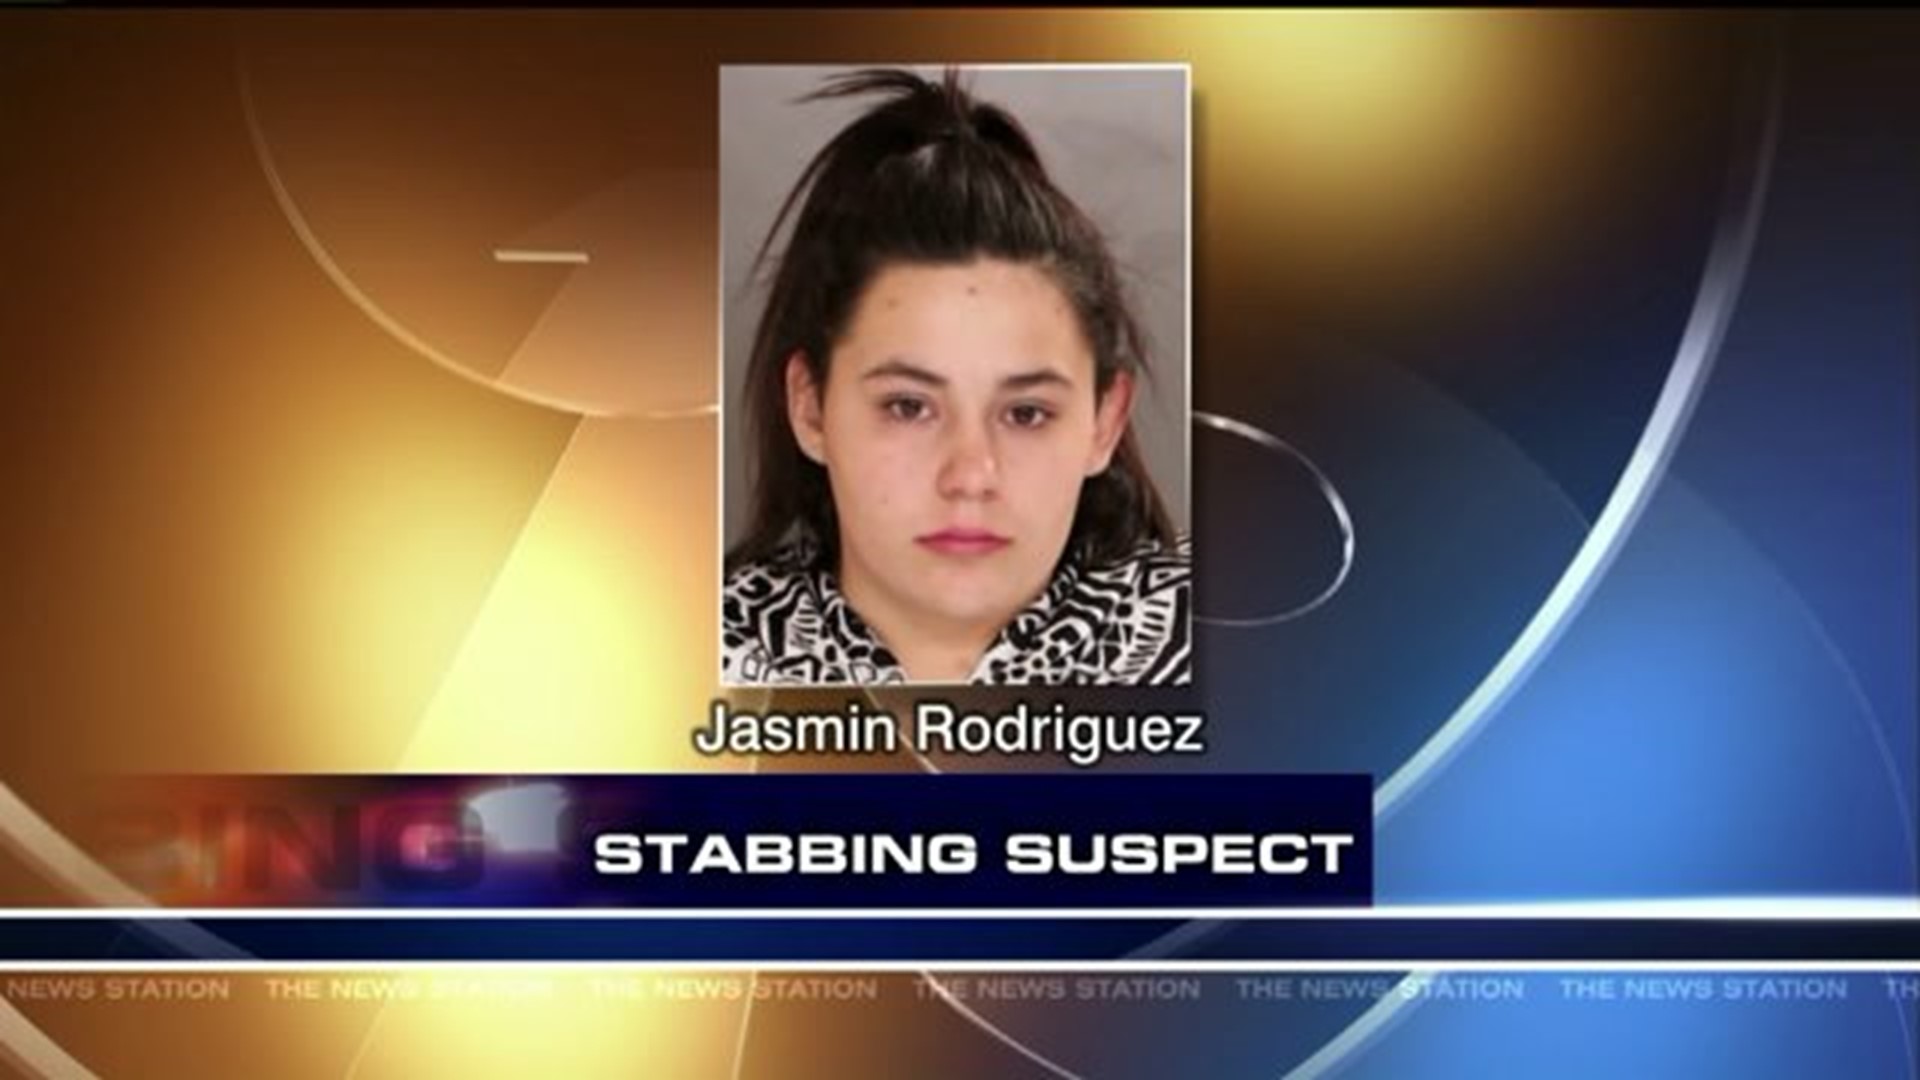 Teen Charged as Adult in Stabbing, Assault in Scranton